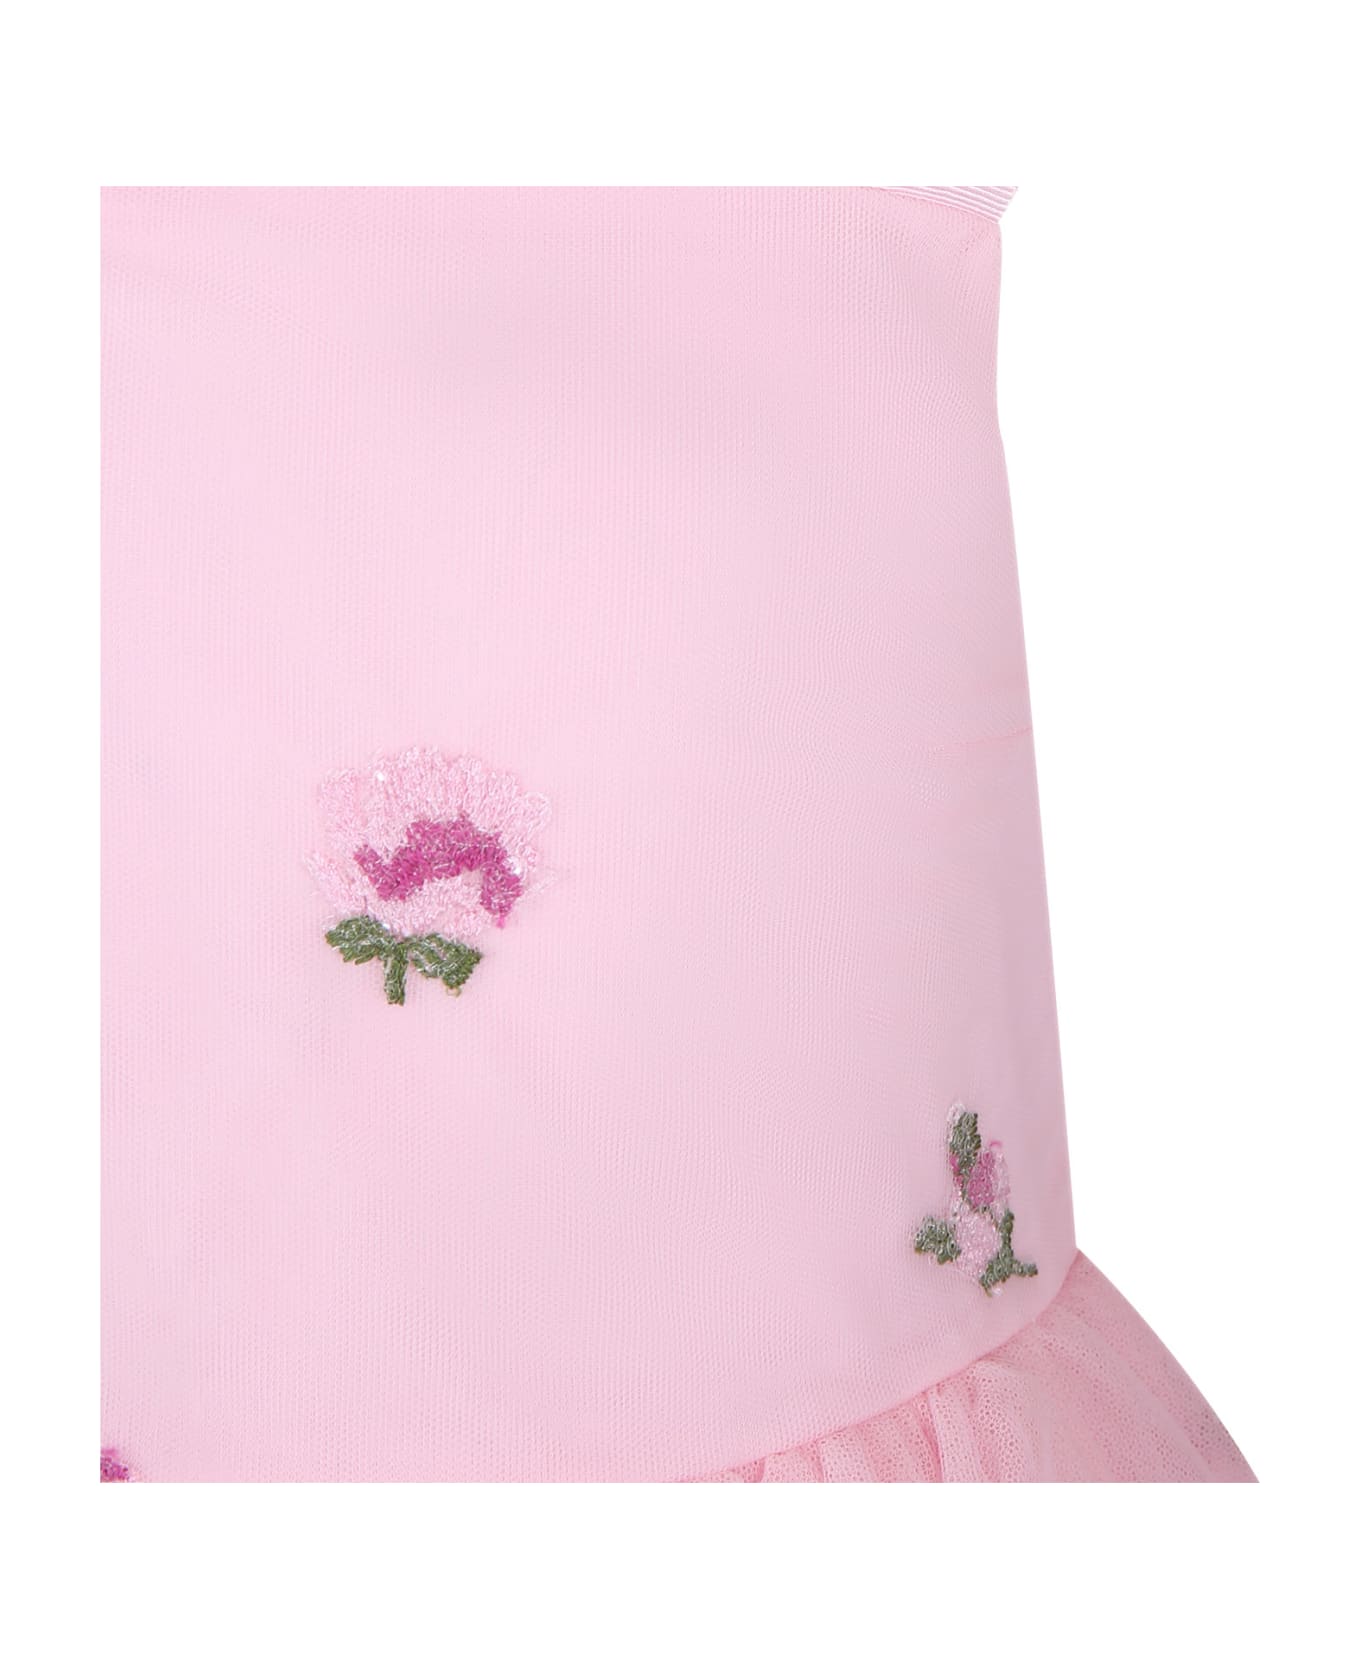 Simonetta Pink Dress For Girl With Flowers - Pink